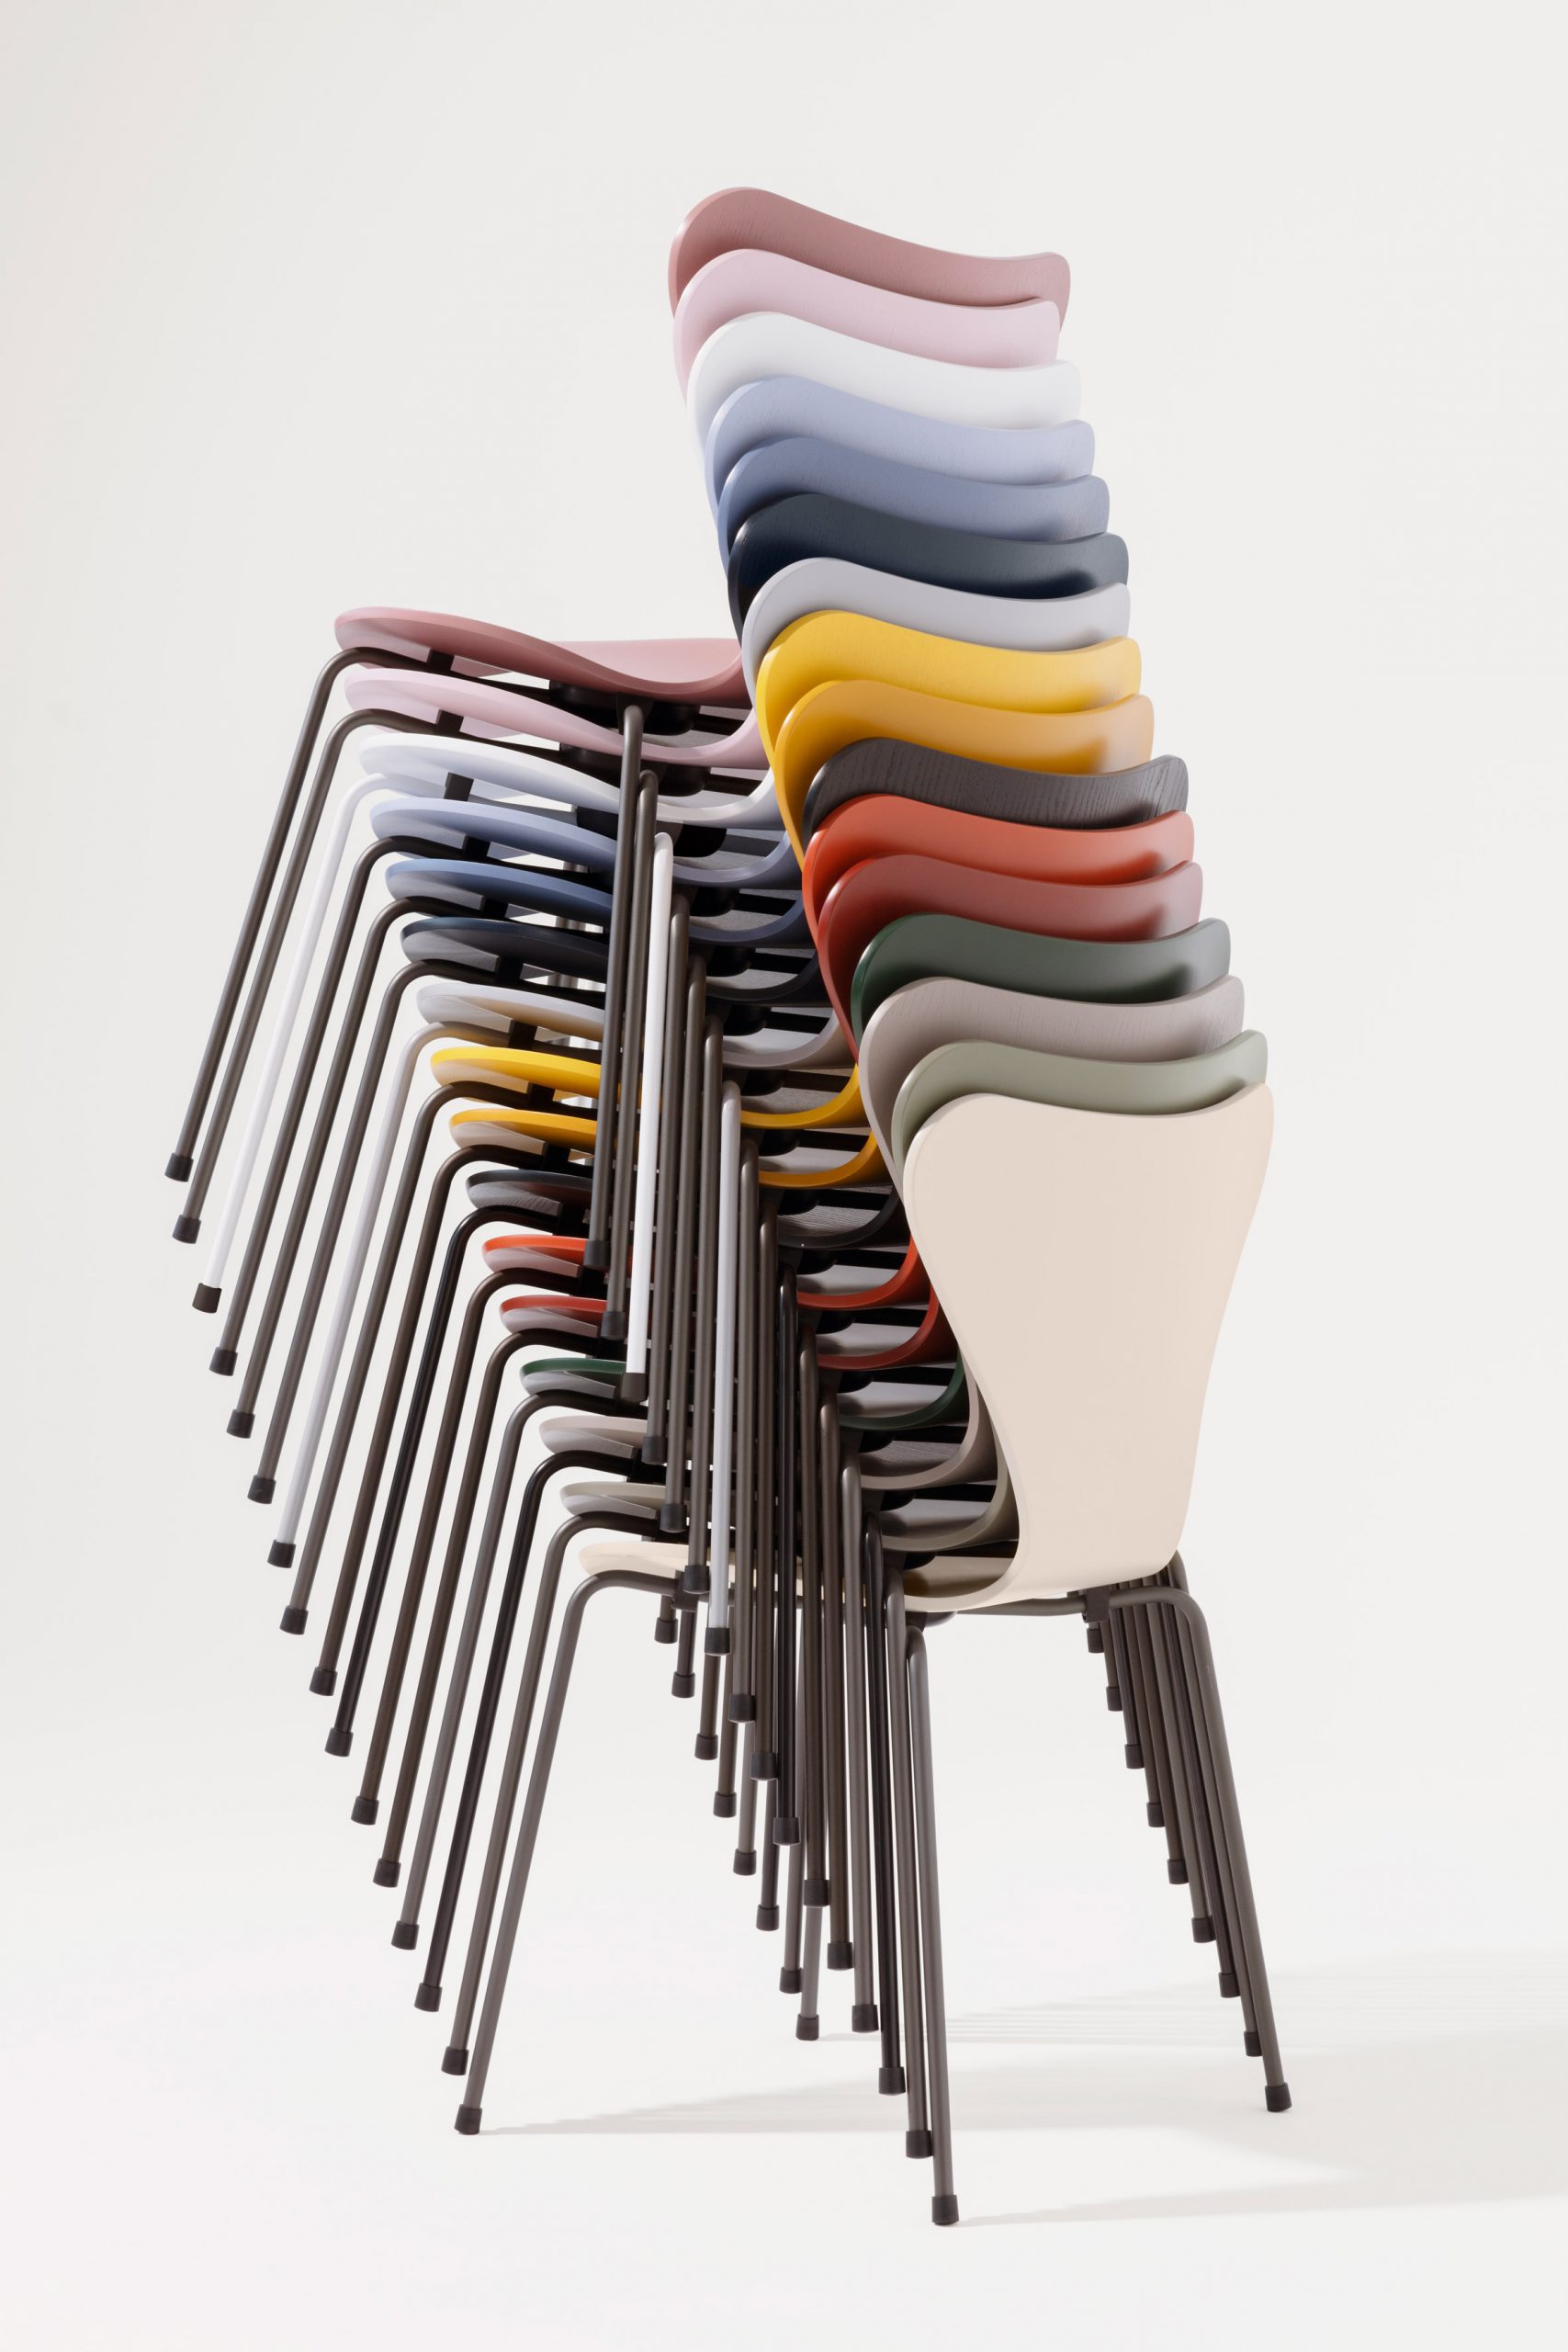 Fritz Hansen launches Series 7, Ant and Grand Prix chair designs by Arne Jacobsen in 16 new colours